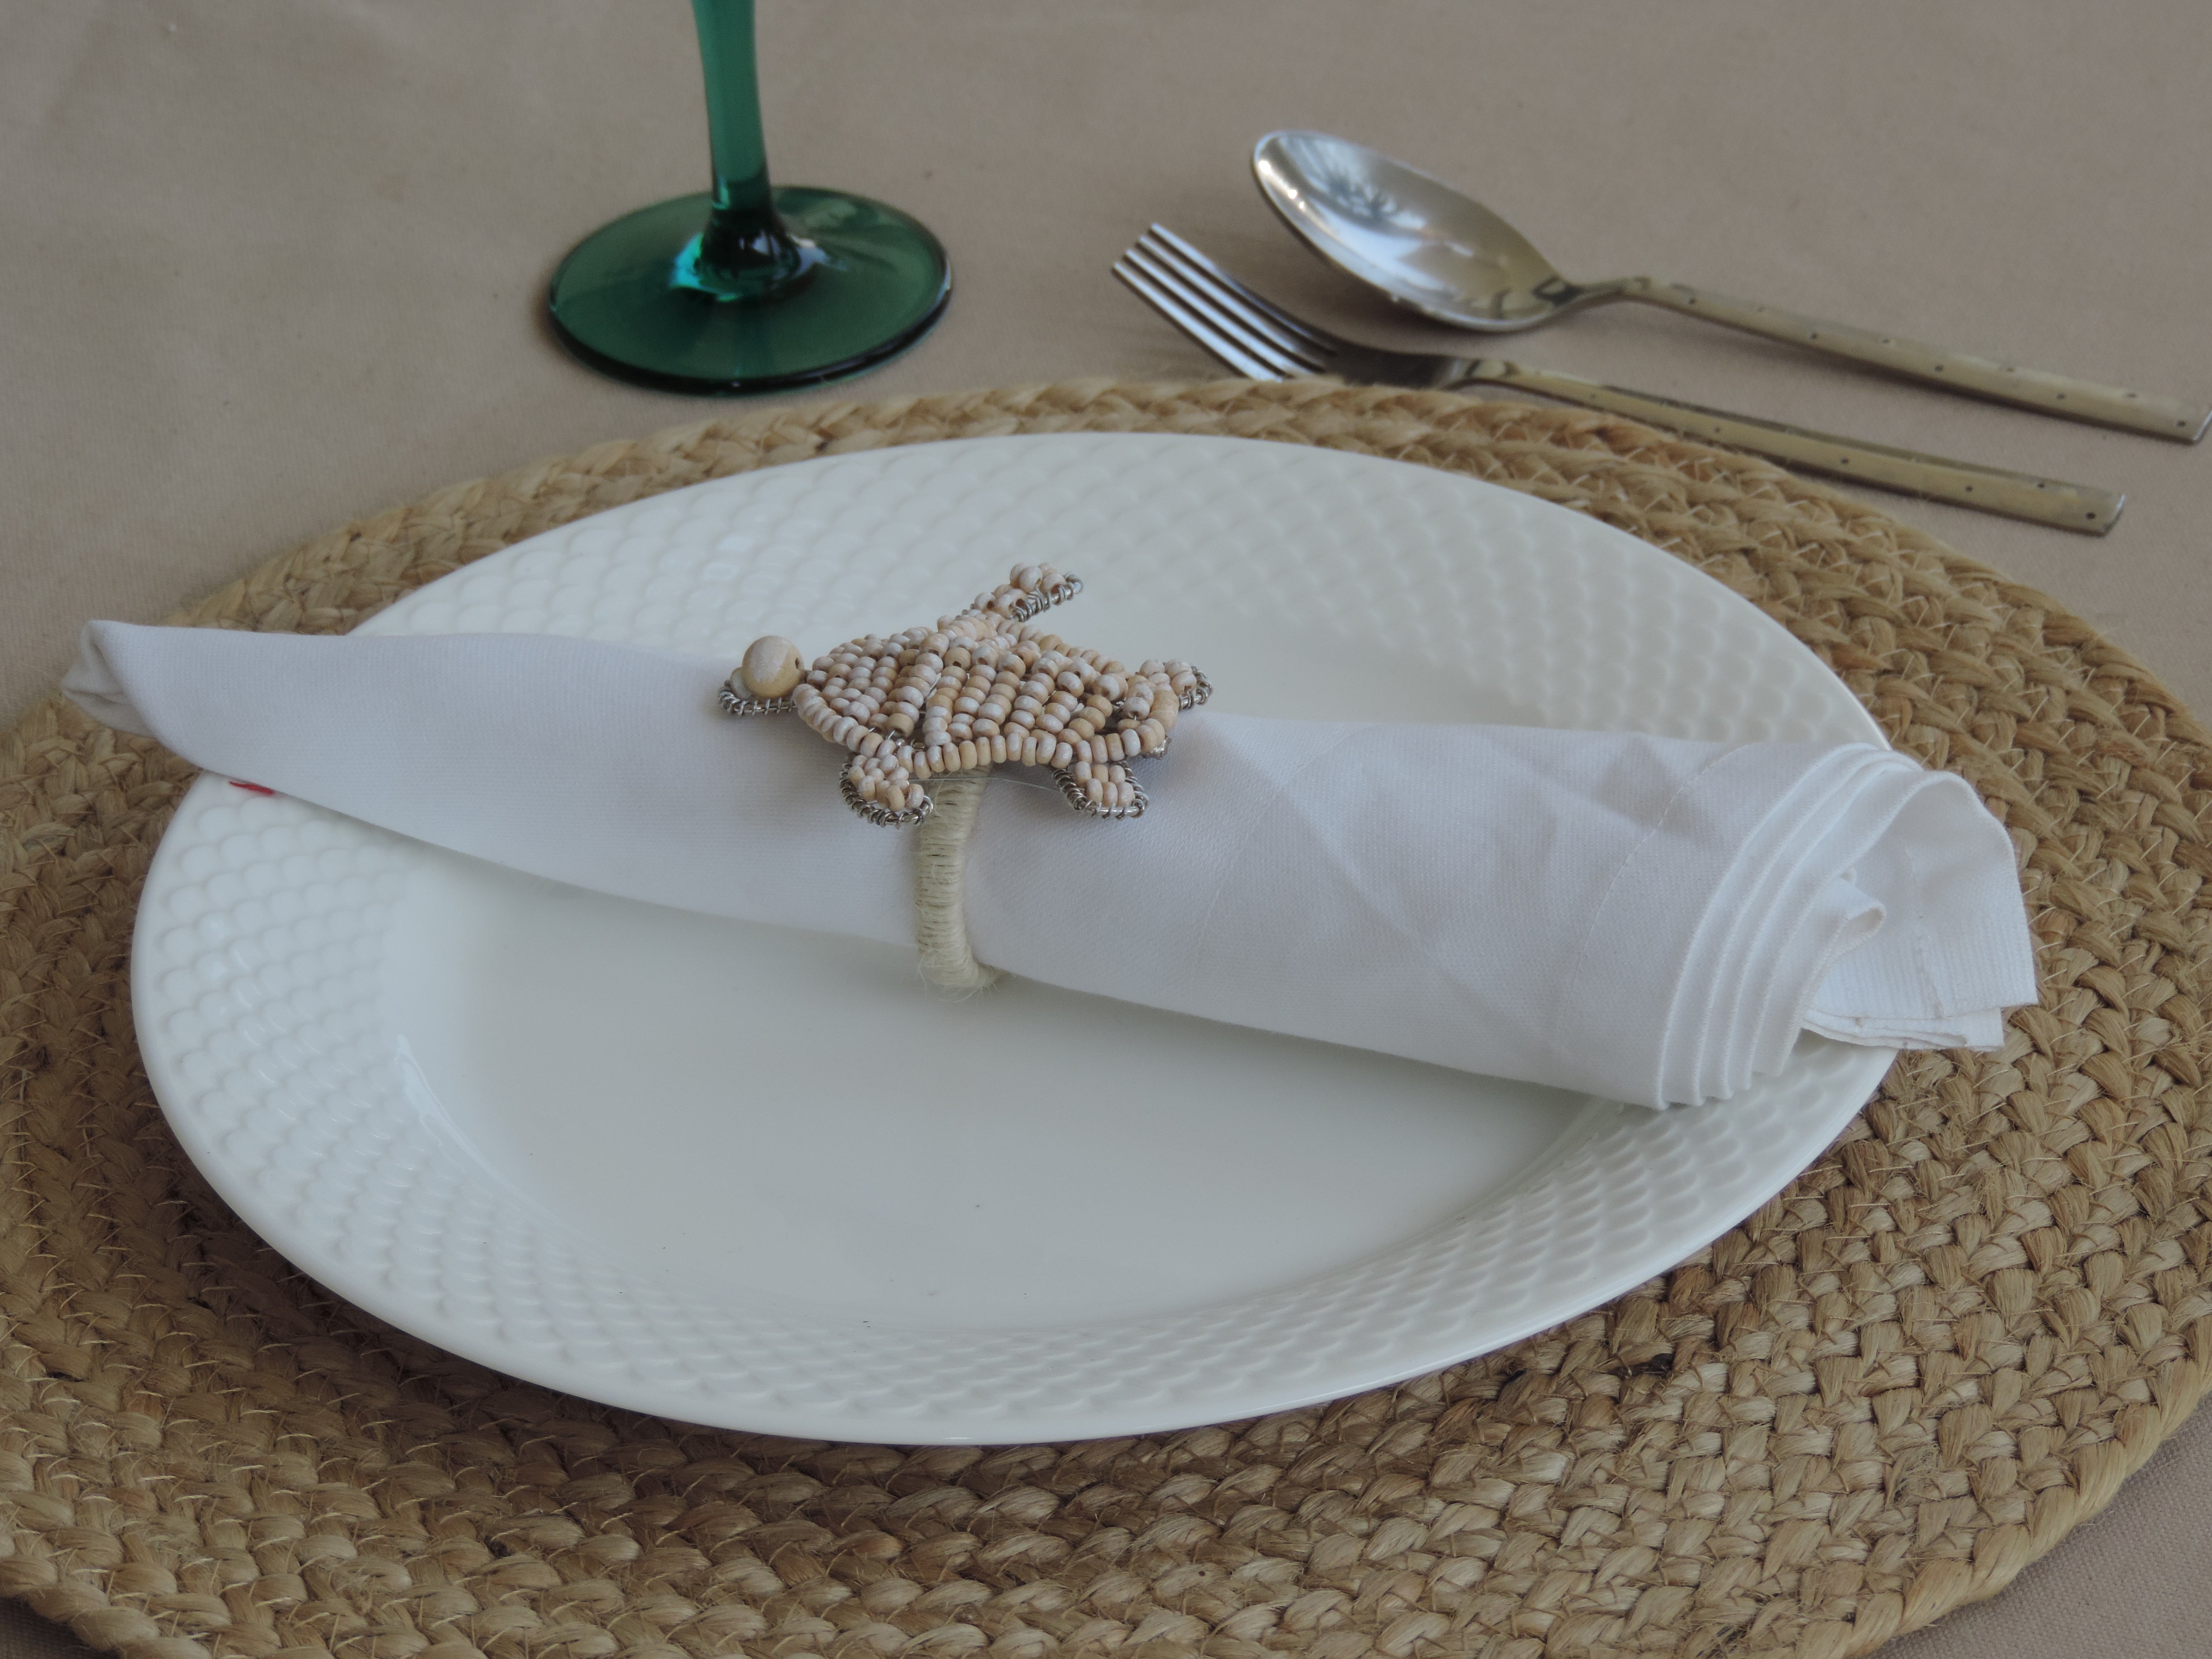 Turtley In Love Napkin Ring / 3.25"x3"x2.25" / Set of 4 / White Natural